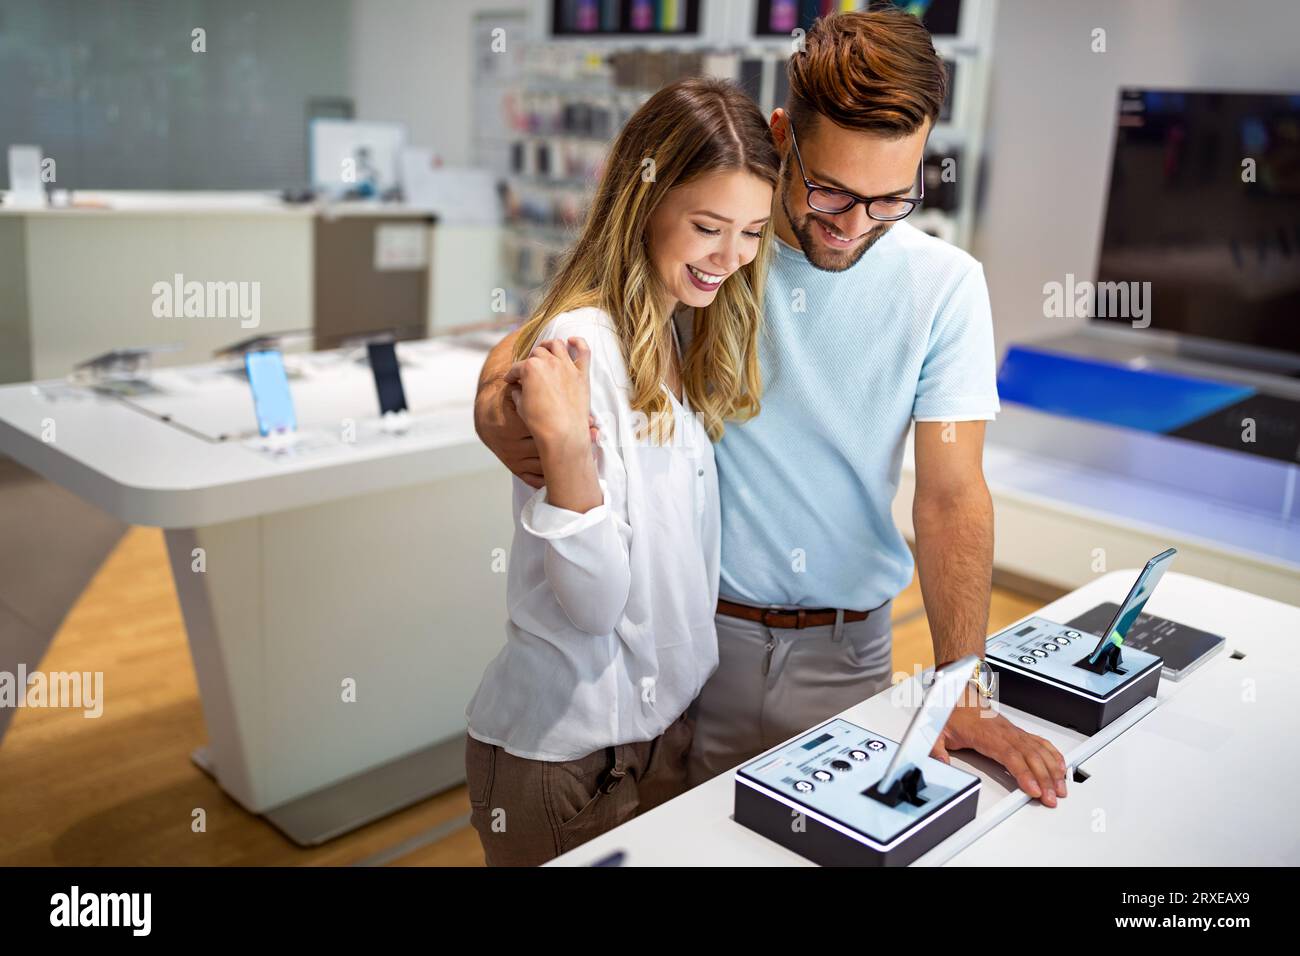 Tech shopping device gadget concept. Happy young people buying a new smartphone in mobile shop. Stock Photo